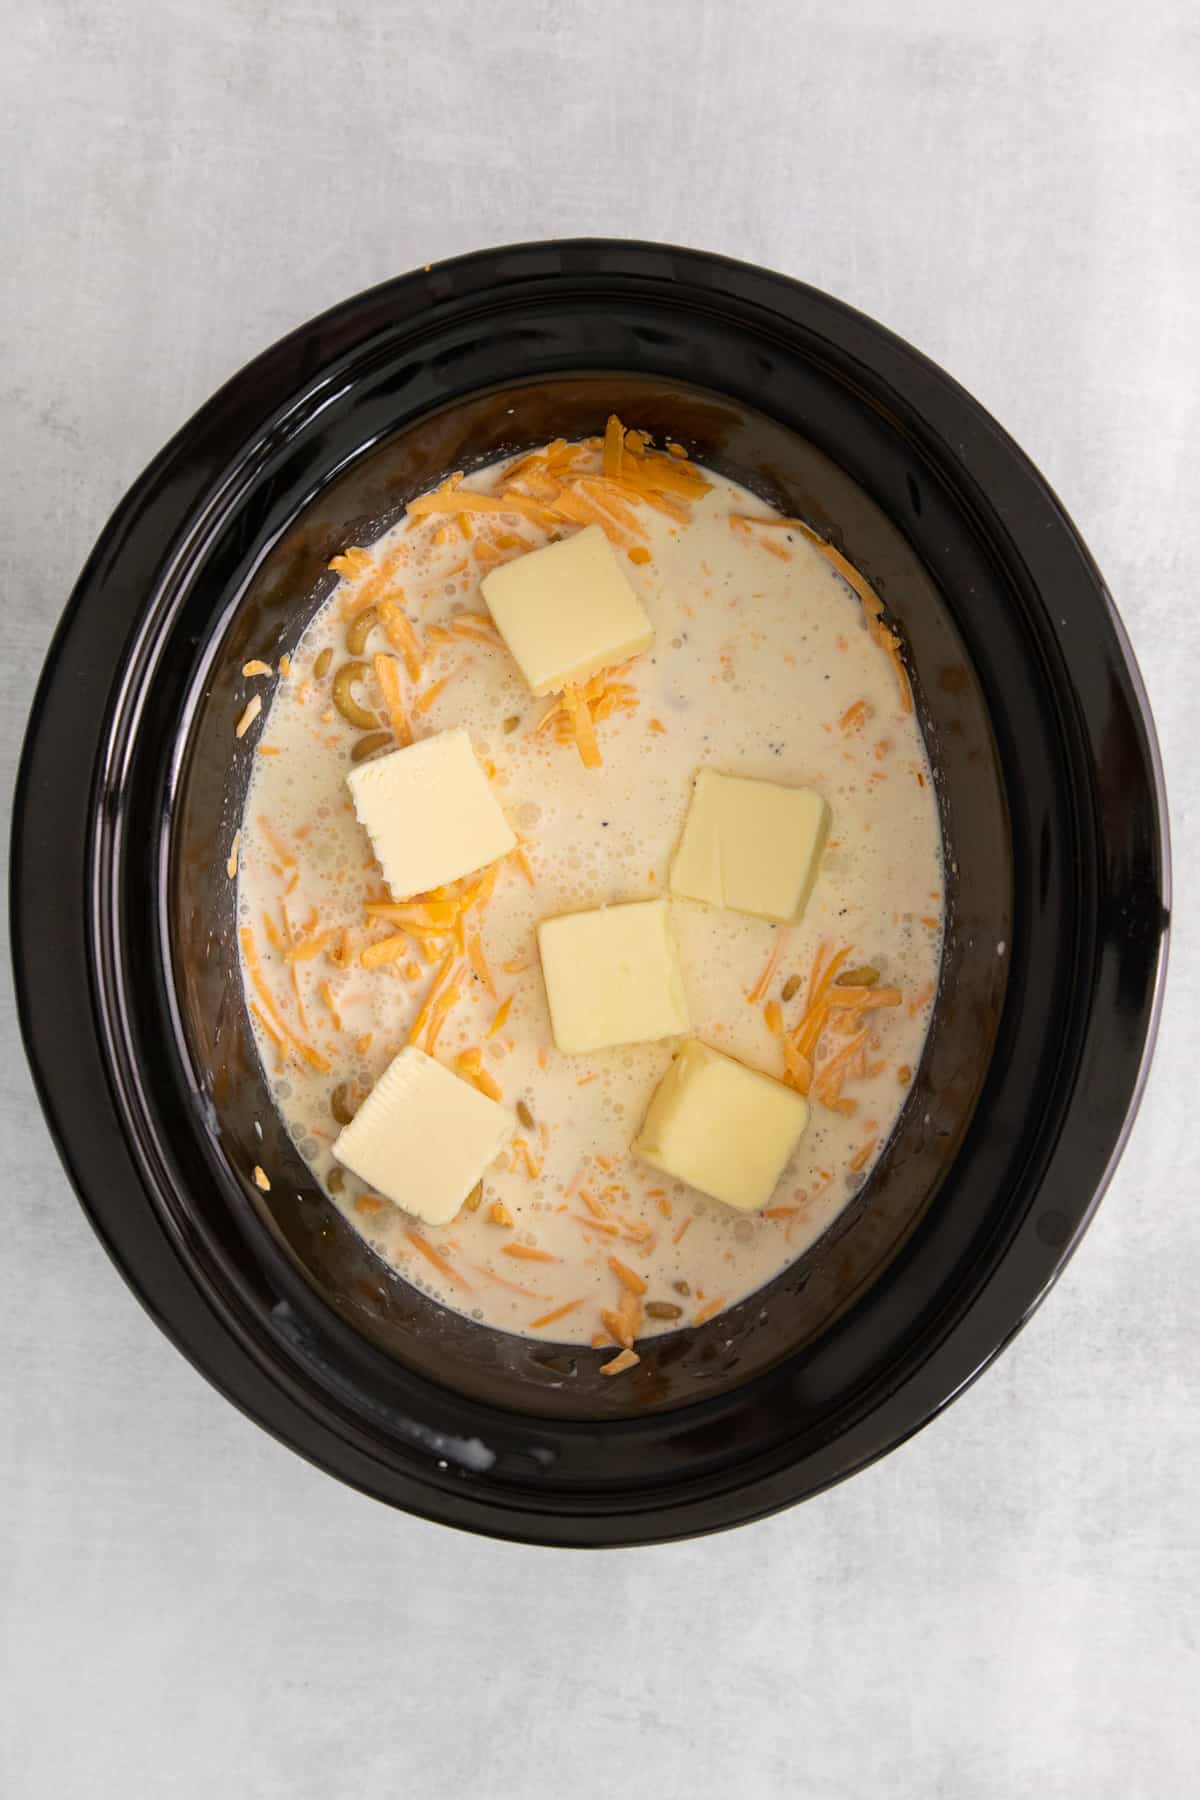 milk, butter, and cheese in crock pot.